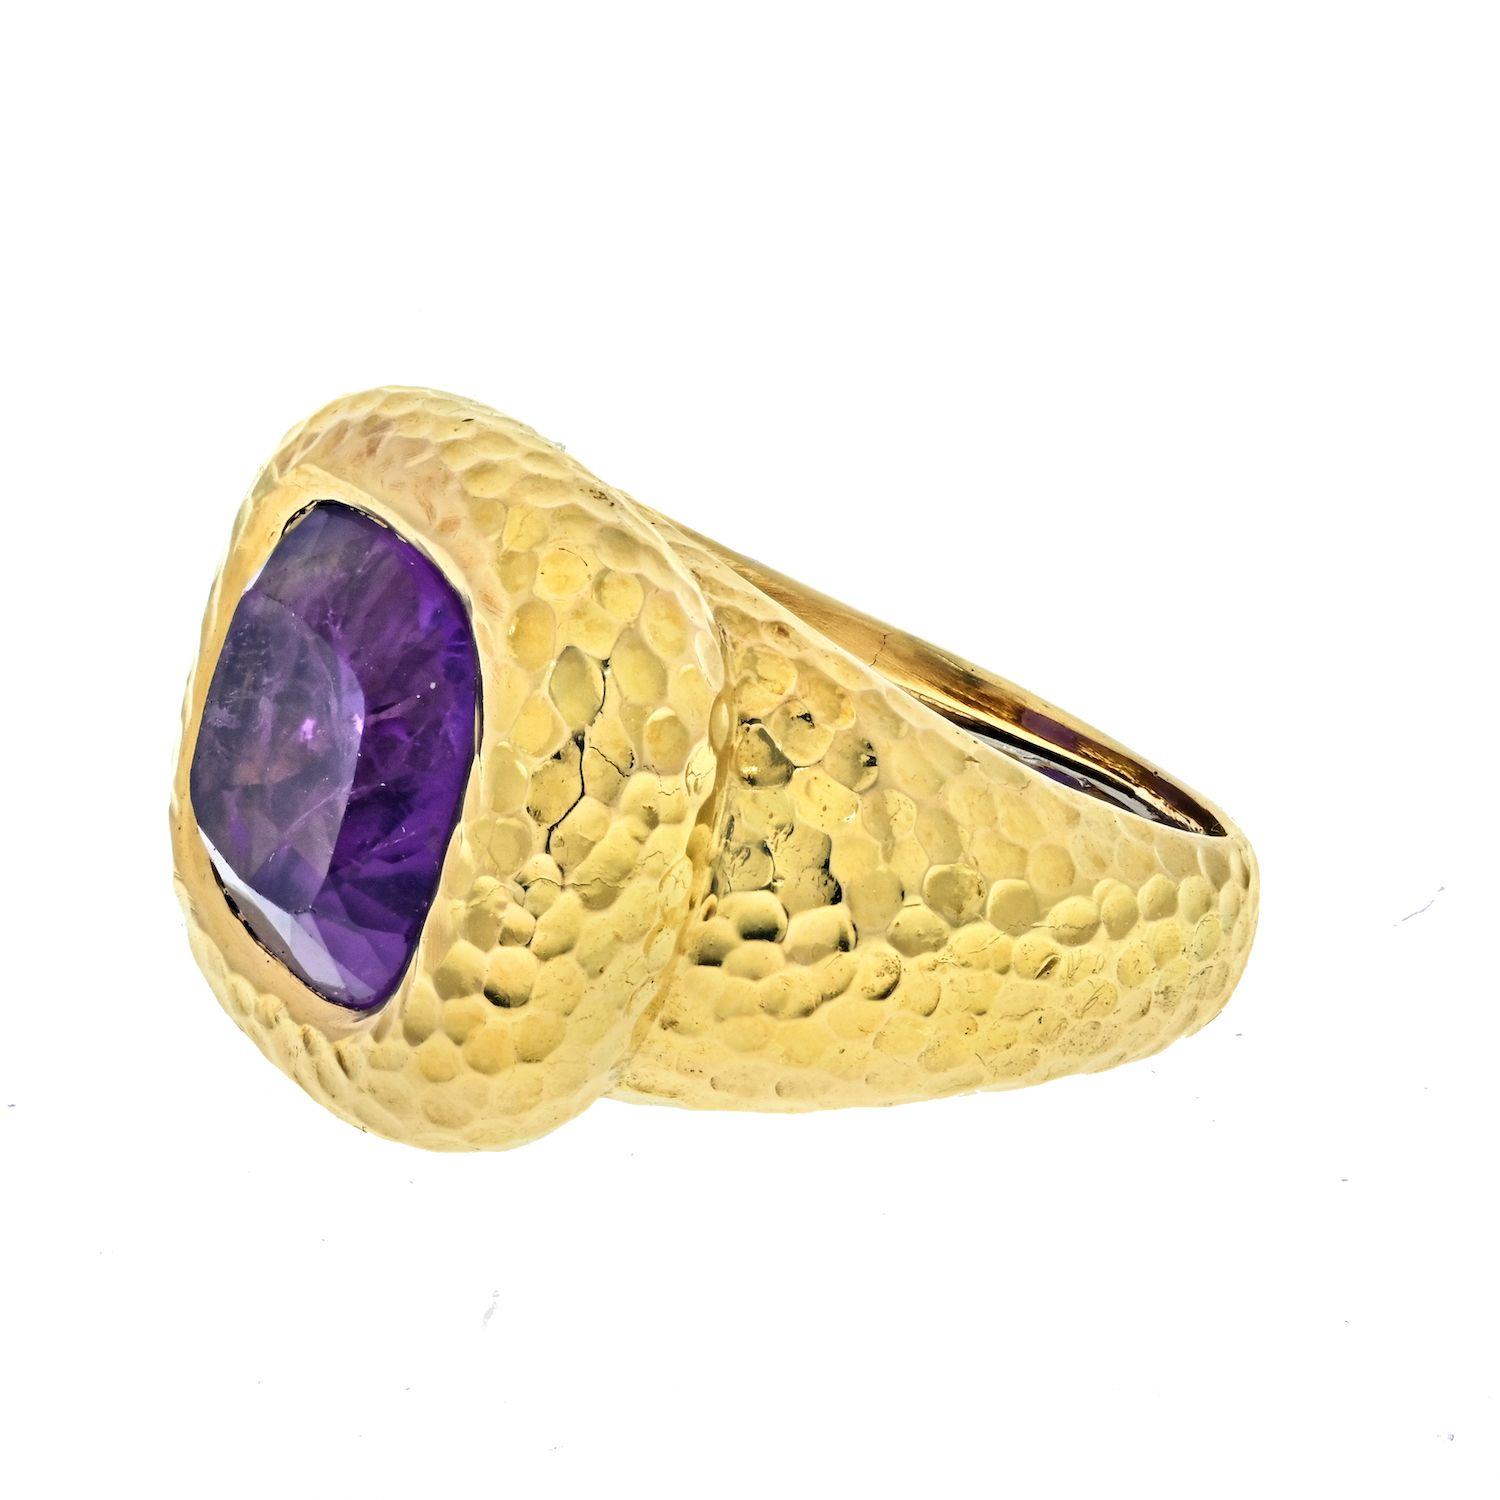 Purple Cushion Cut Amethyst ring, David Webb. Royalty, this stone represents a strong presence, this deep purple amethyst stone fills your regal soul. 

A rare find crafted by David Webb, at a very affordable price.  You will be very happy with the